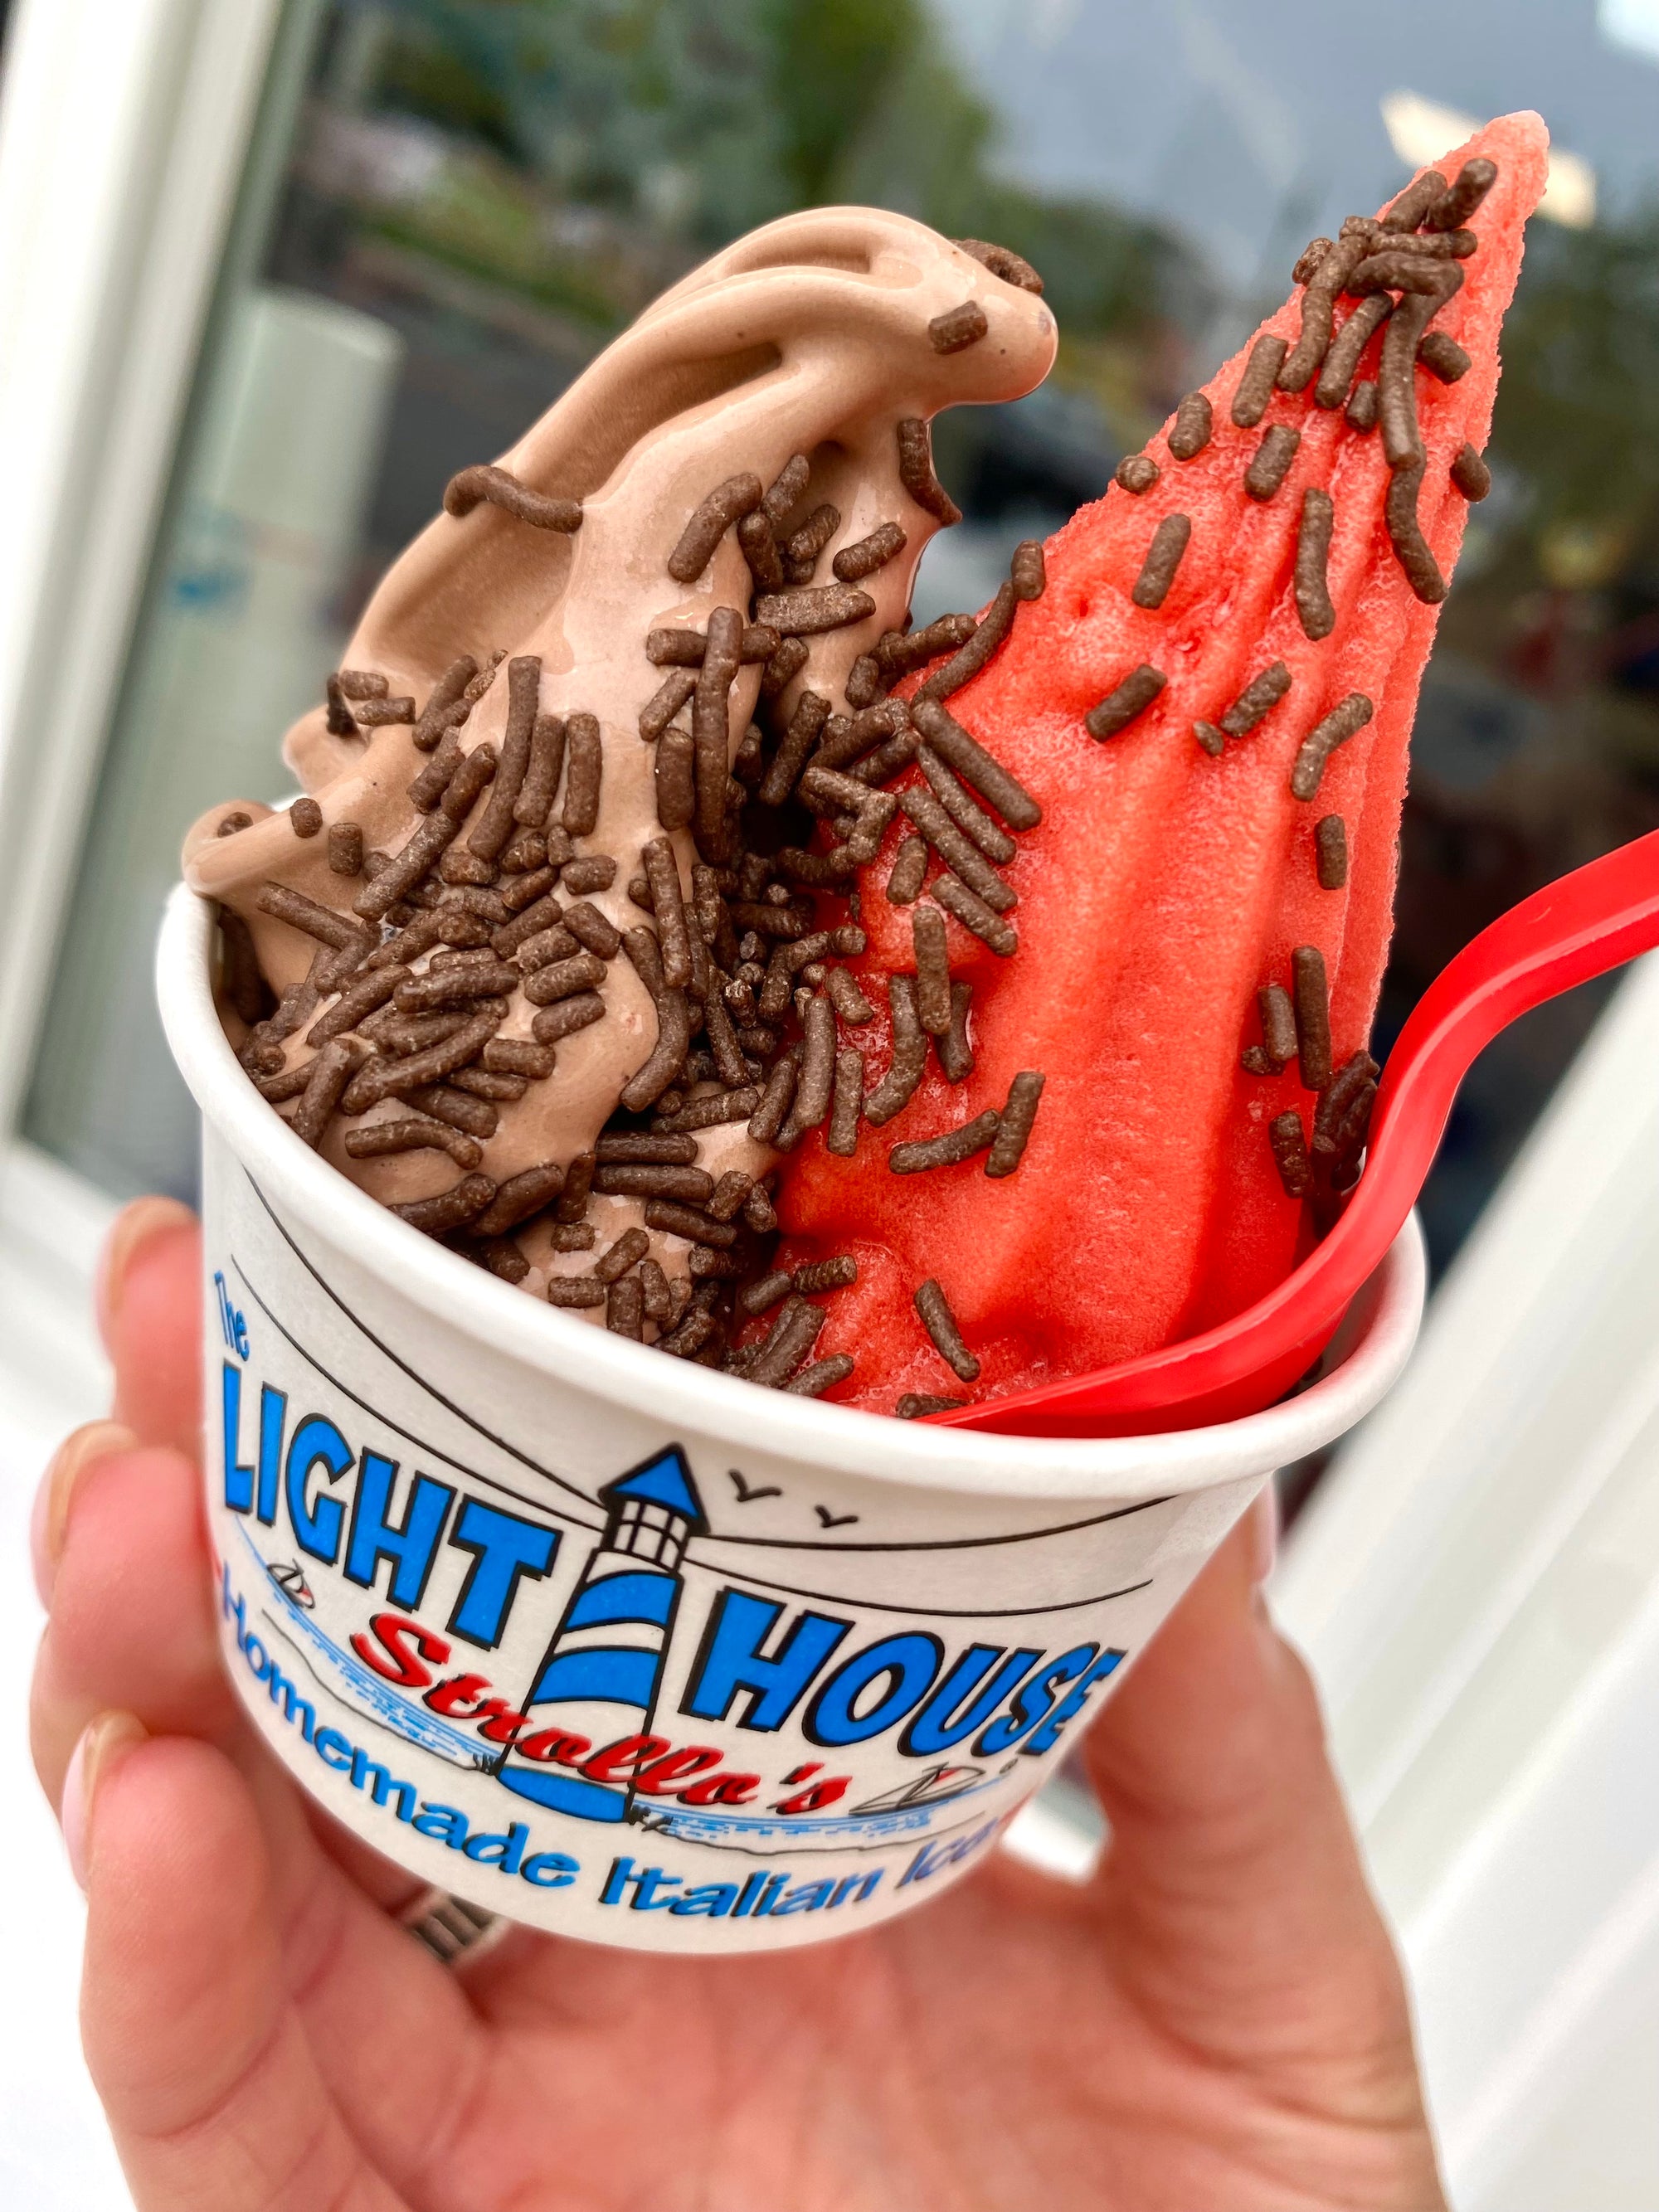 A Strollo's Lighthouse cup with chocolate soft serve and homemade cherry Italian ice topped with chocolate sprinkles